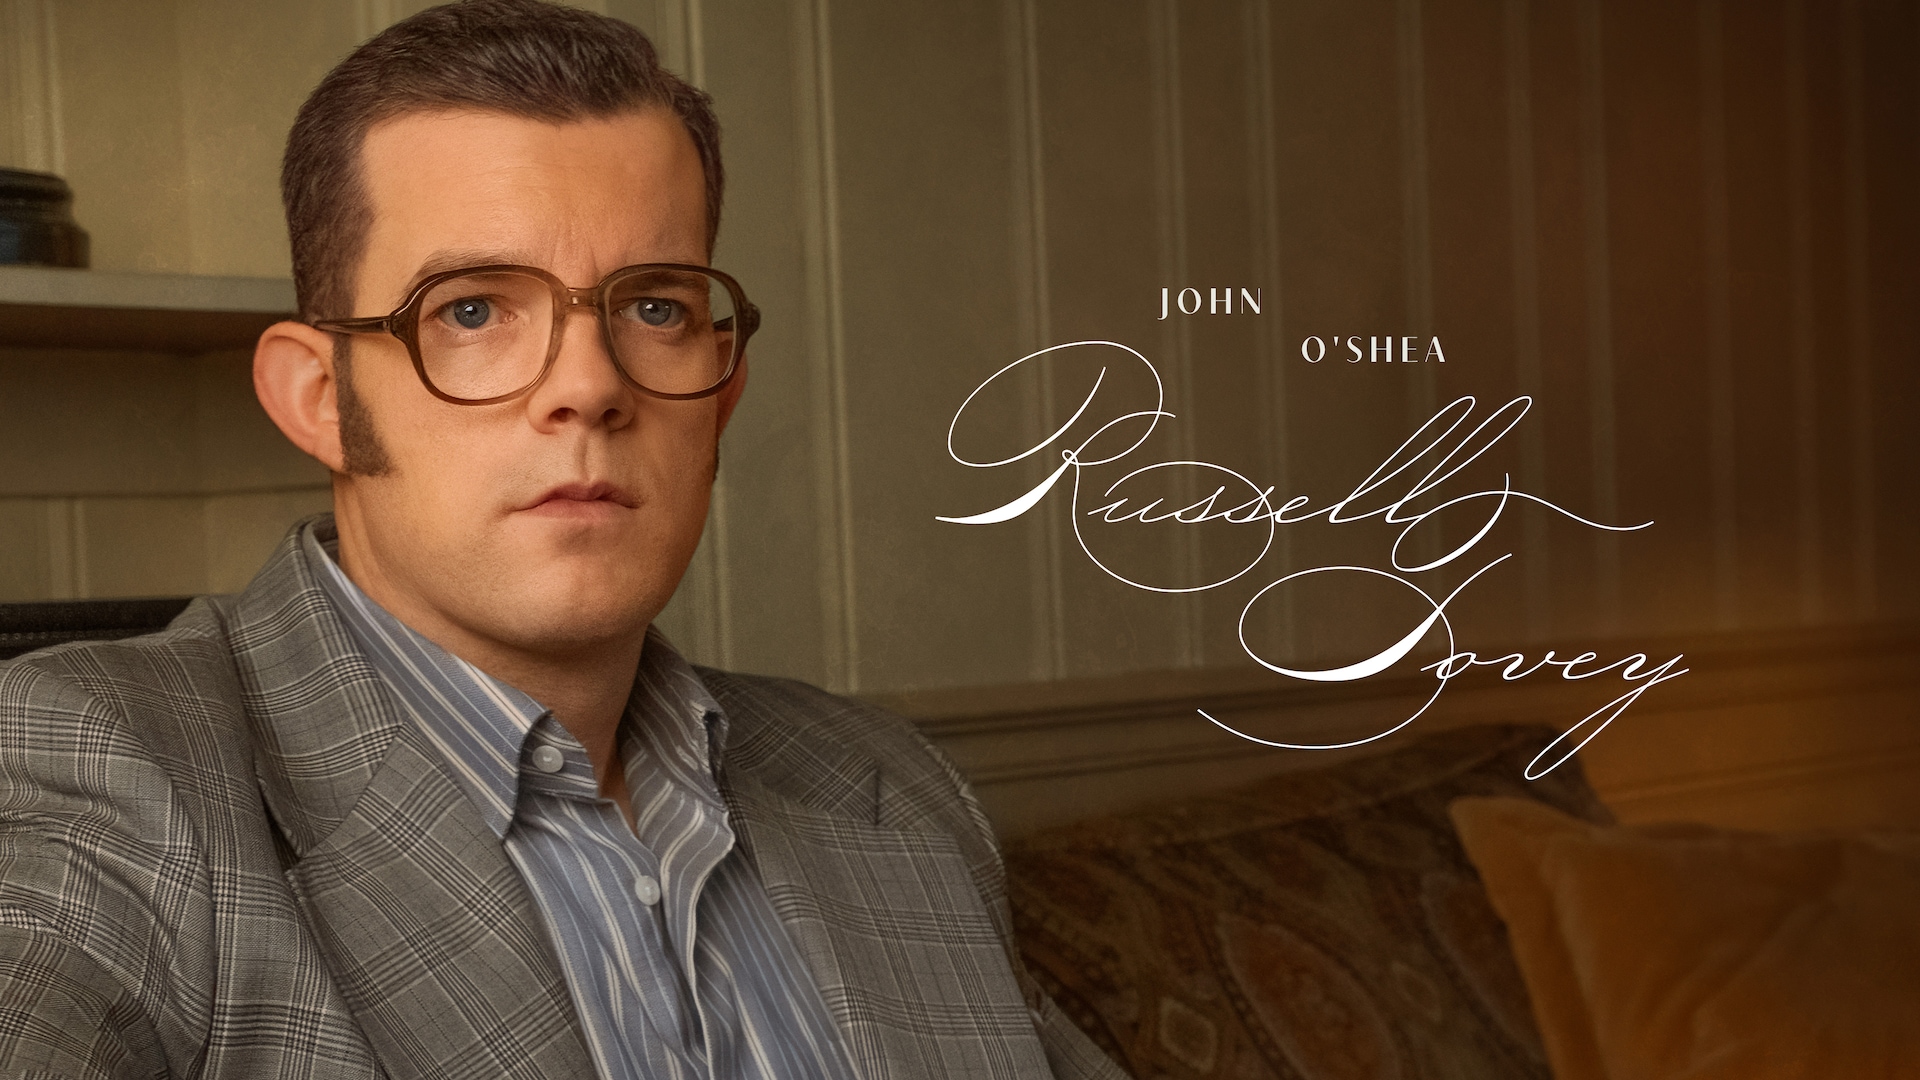 Russell Tovey as John O'Shea in FEUD